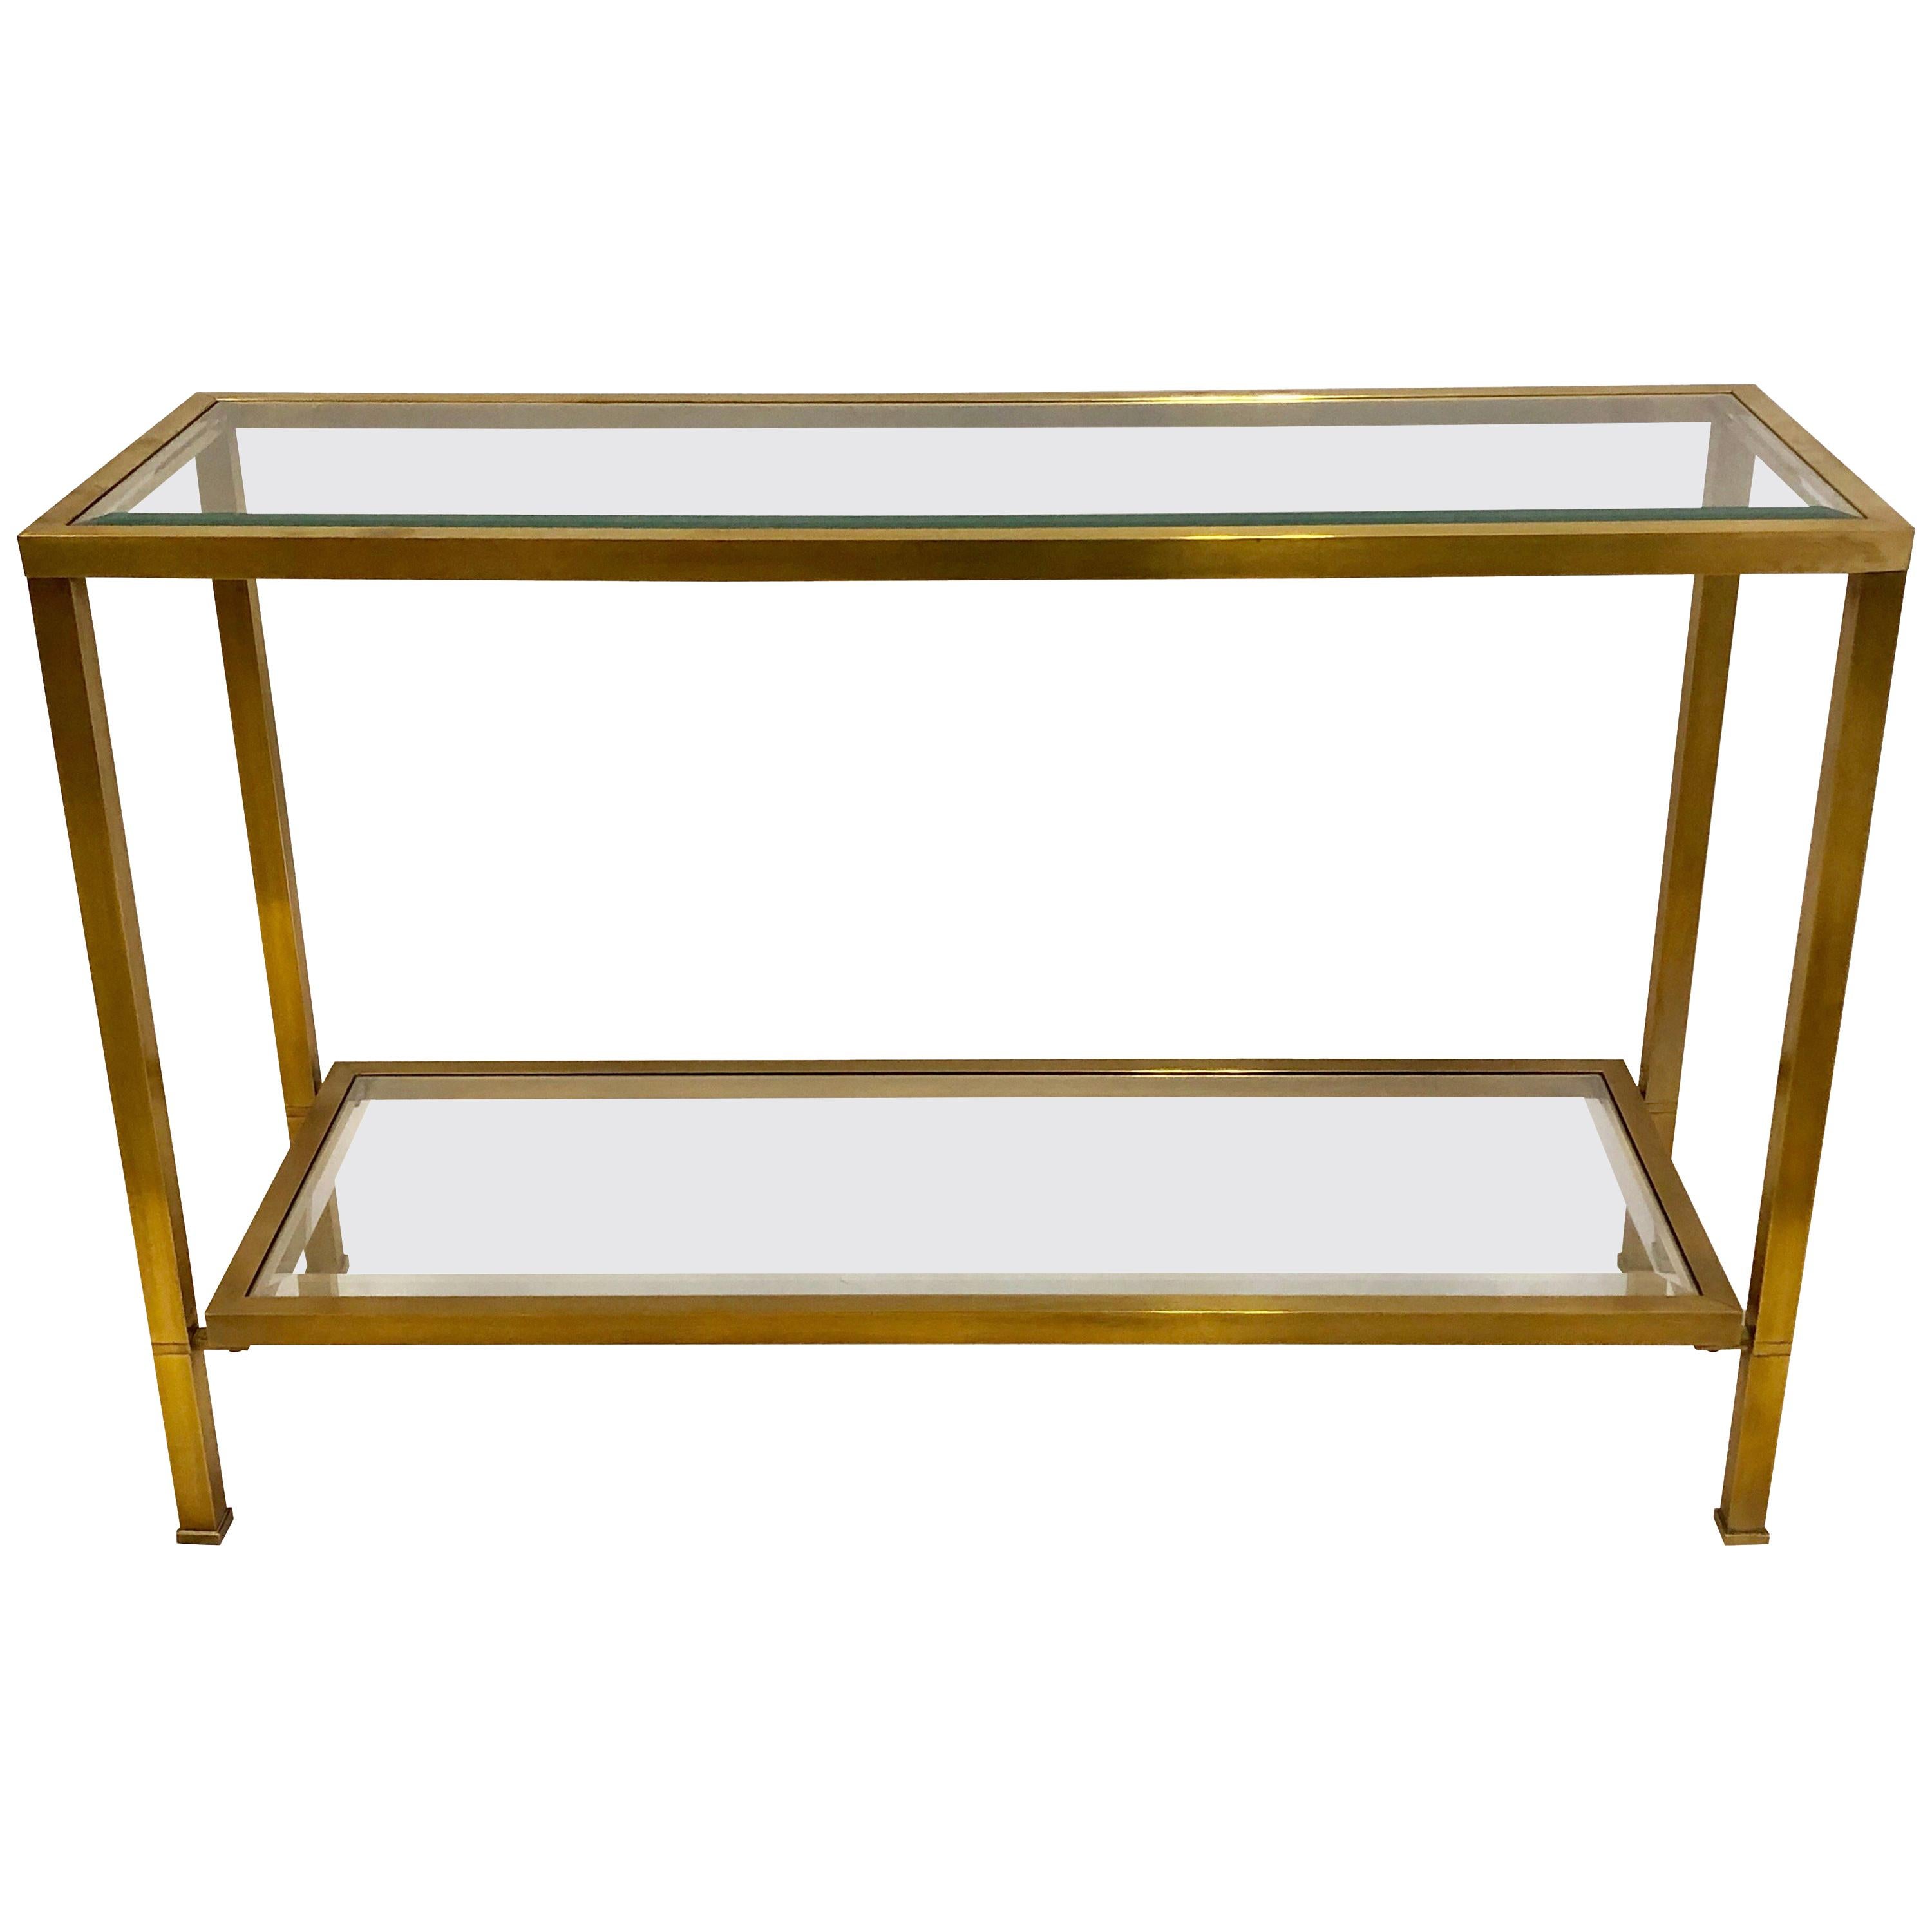 French Modern Neoclassical Double Level Bronze Sofa Table / Console Attr. Quinet